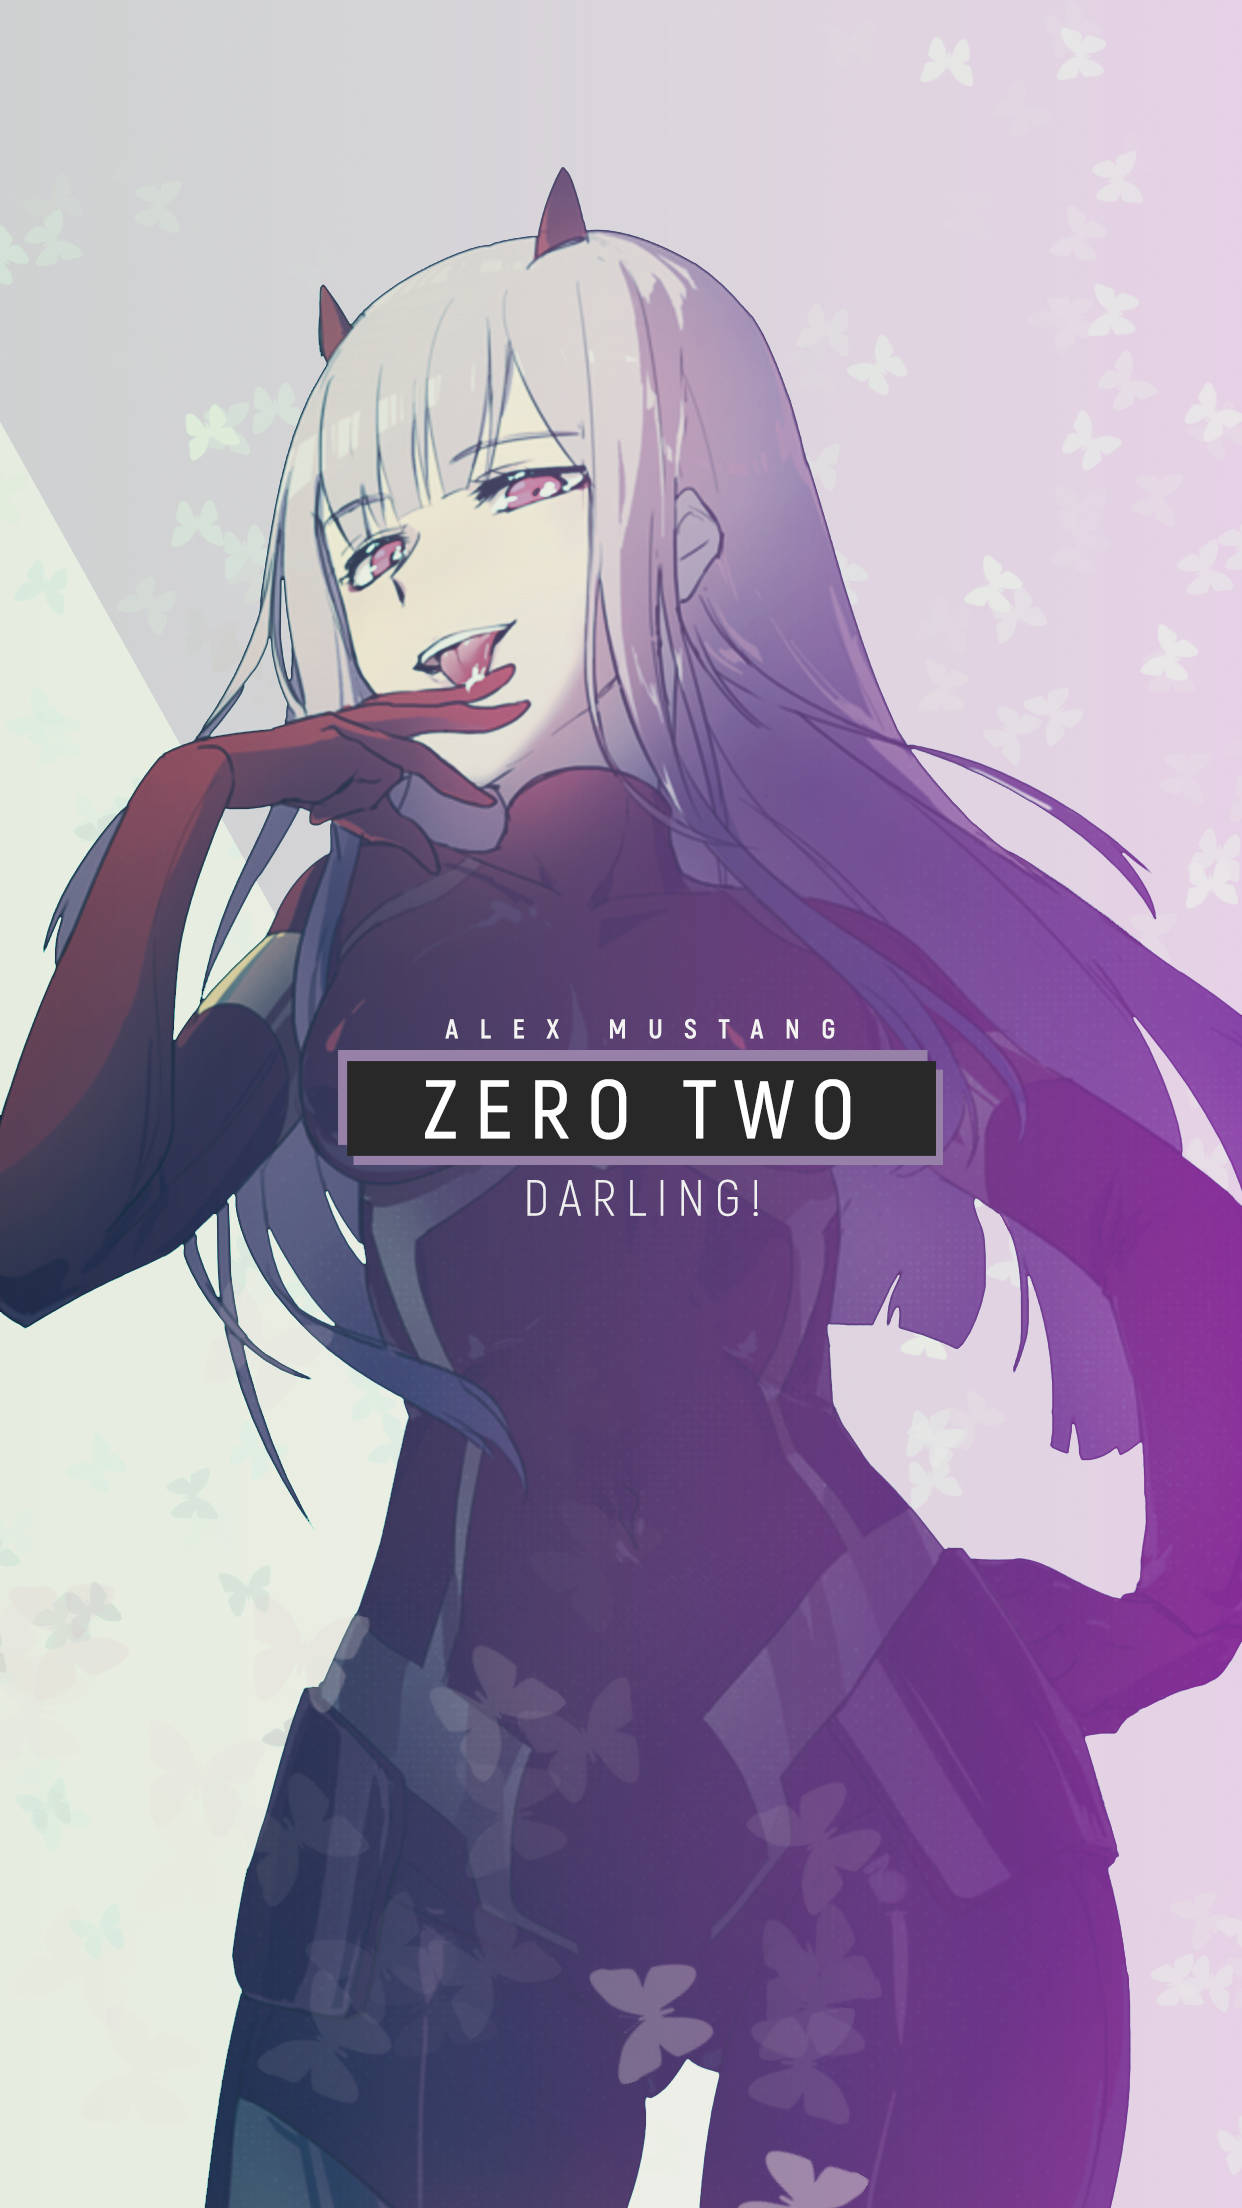 Download Zero Two With Armored Gear Phone Wallpaper | Wallpapers.com